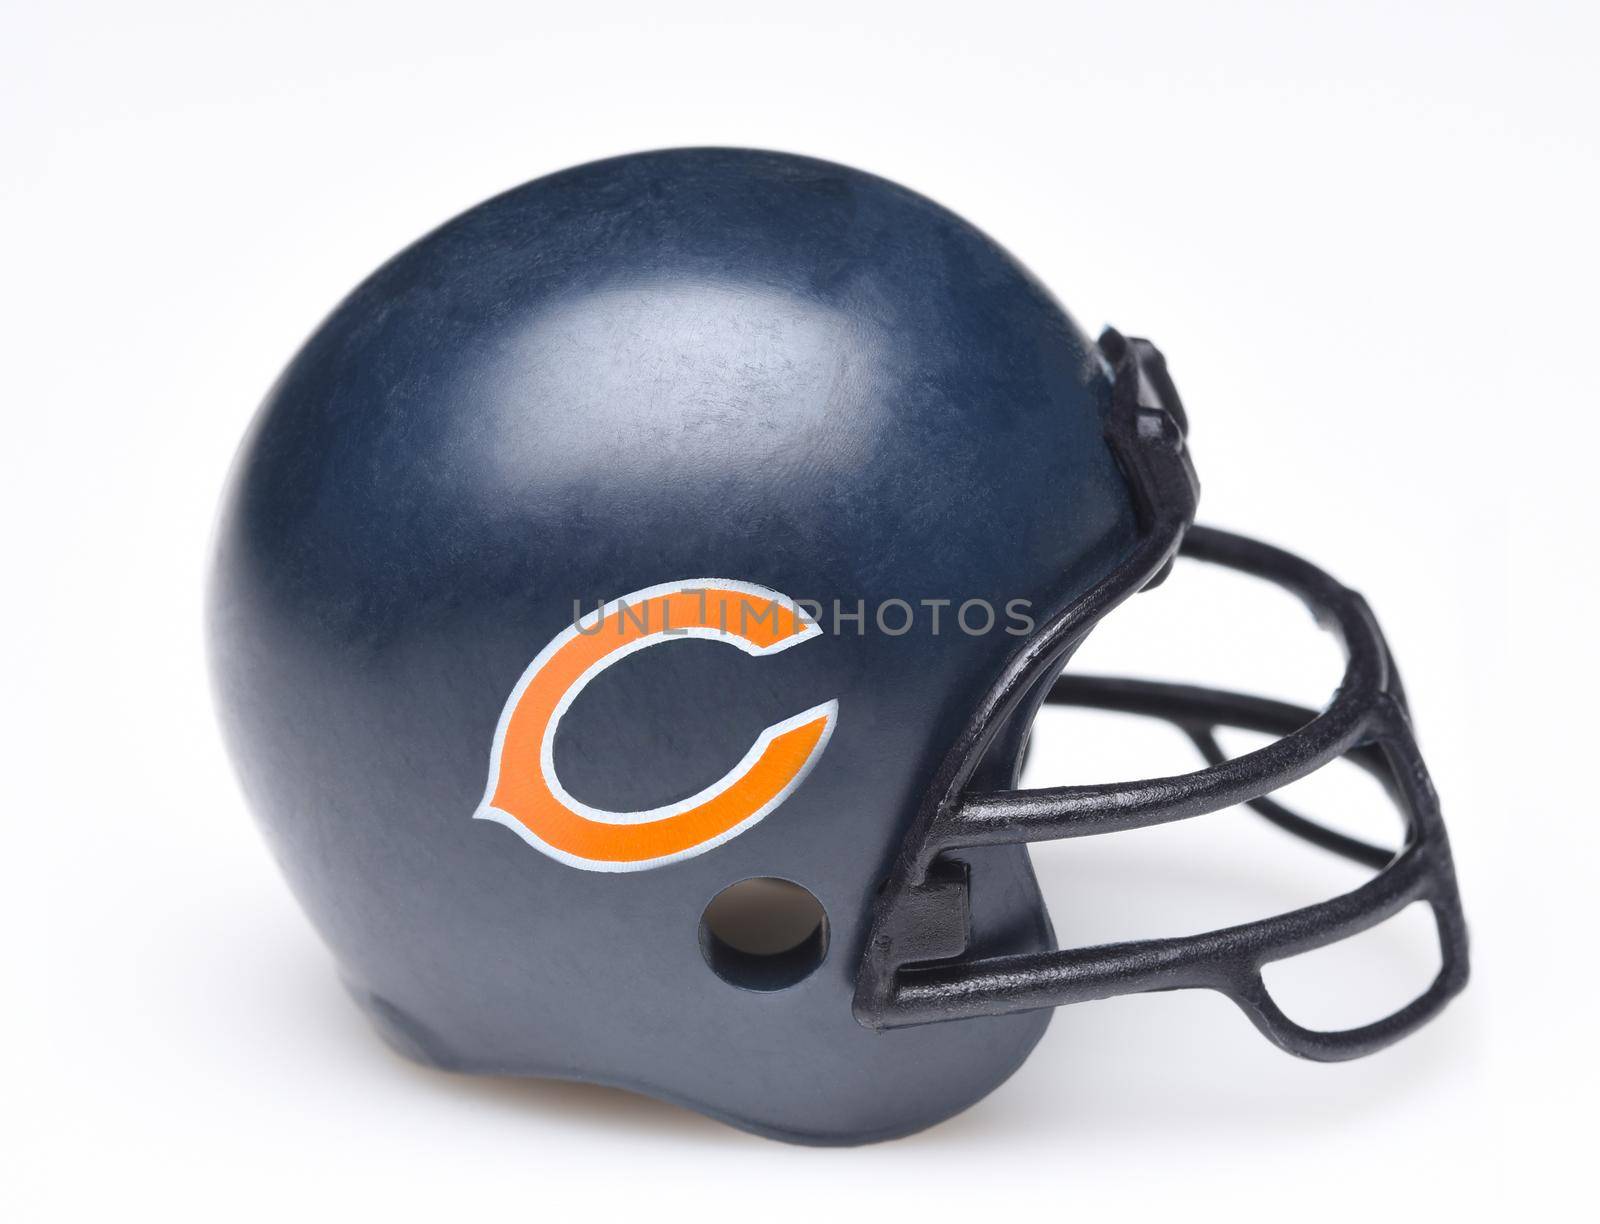 IRVINE, CALIFORNIA - AUGUST 30, 2018: Mini Collectable Football Helmet for the Chicago Bears of the National Football Conference North.